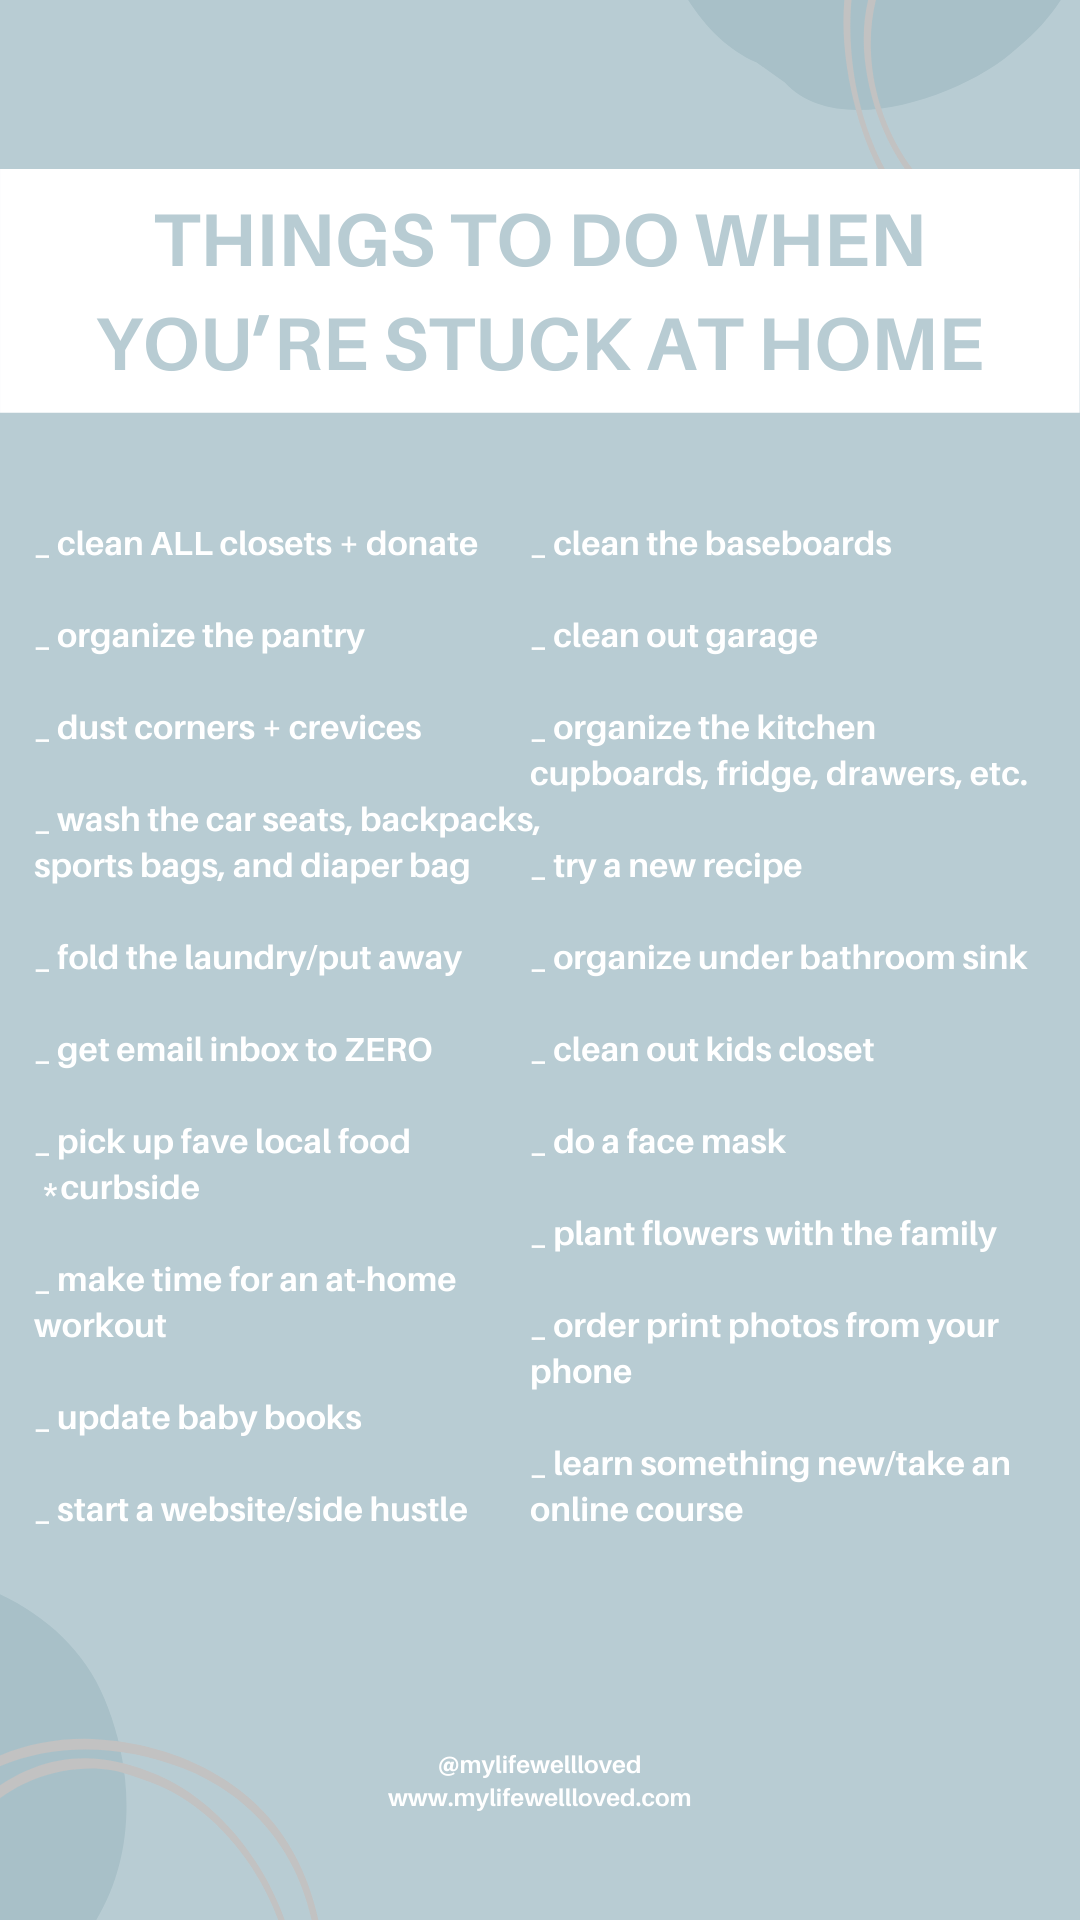 15 useful things to do when you're stuck at home